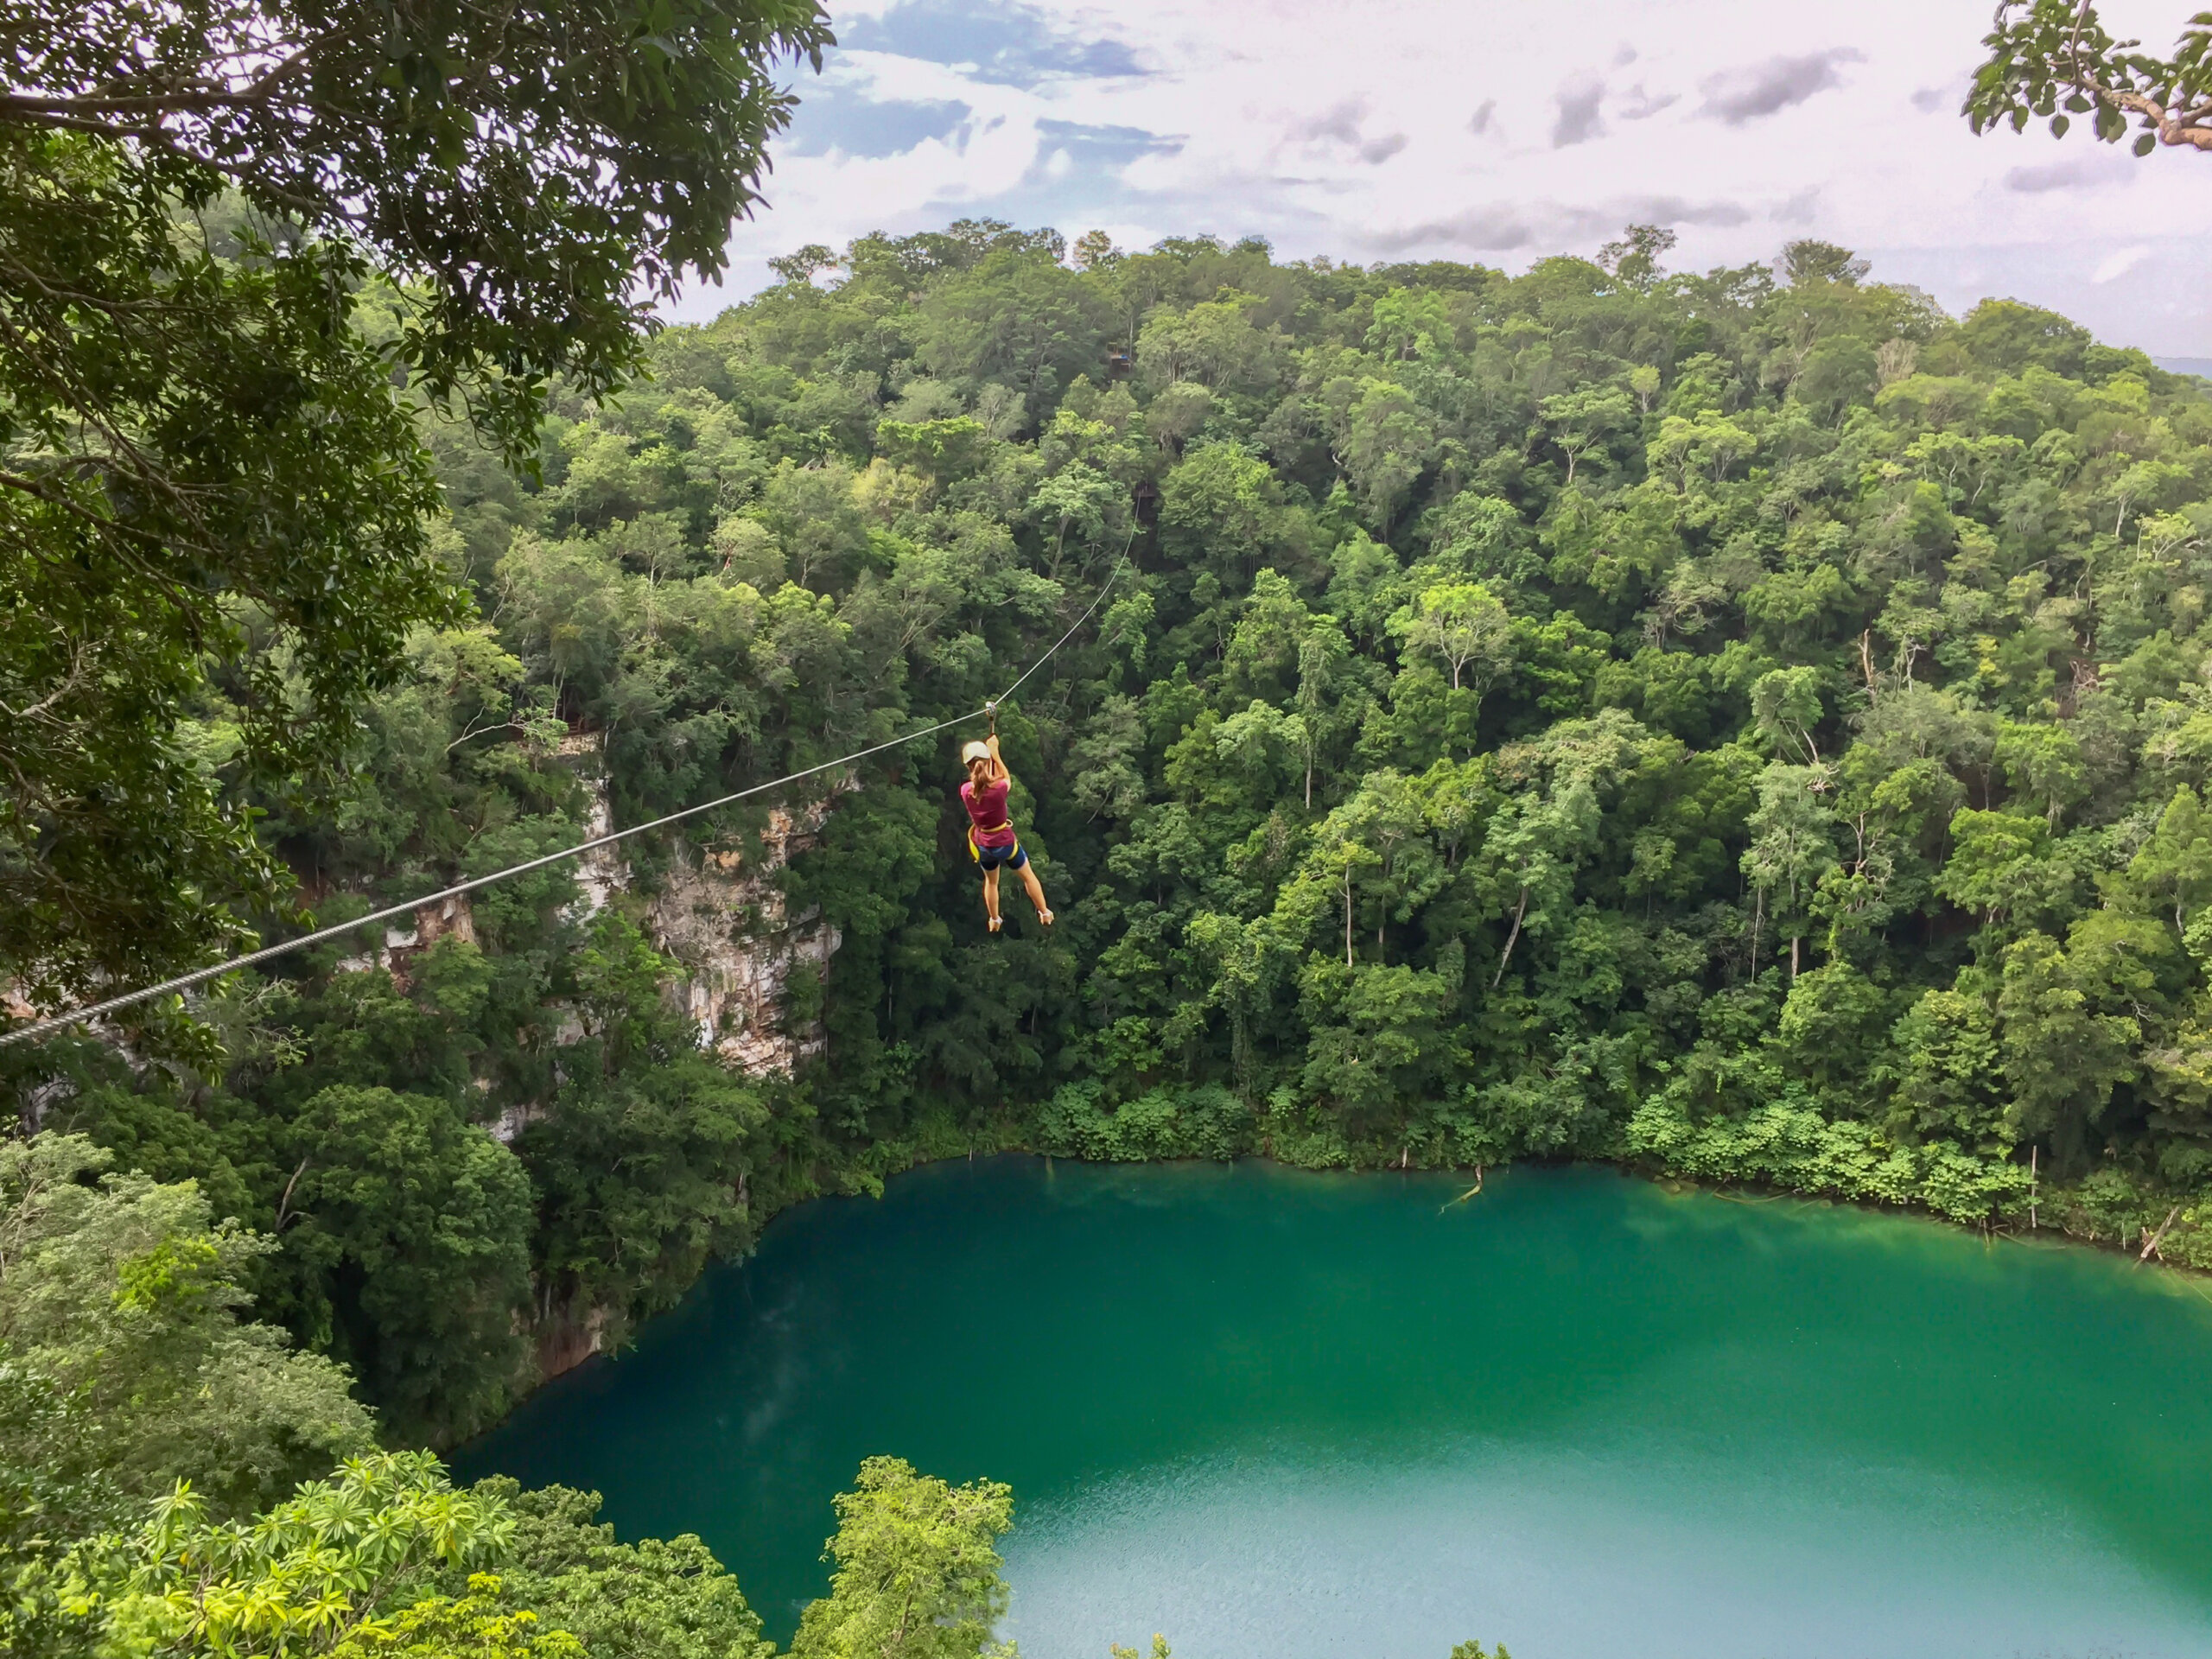 Girl ziplining over the water of a cenote in the Mexican jungle